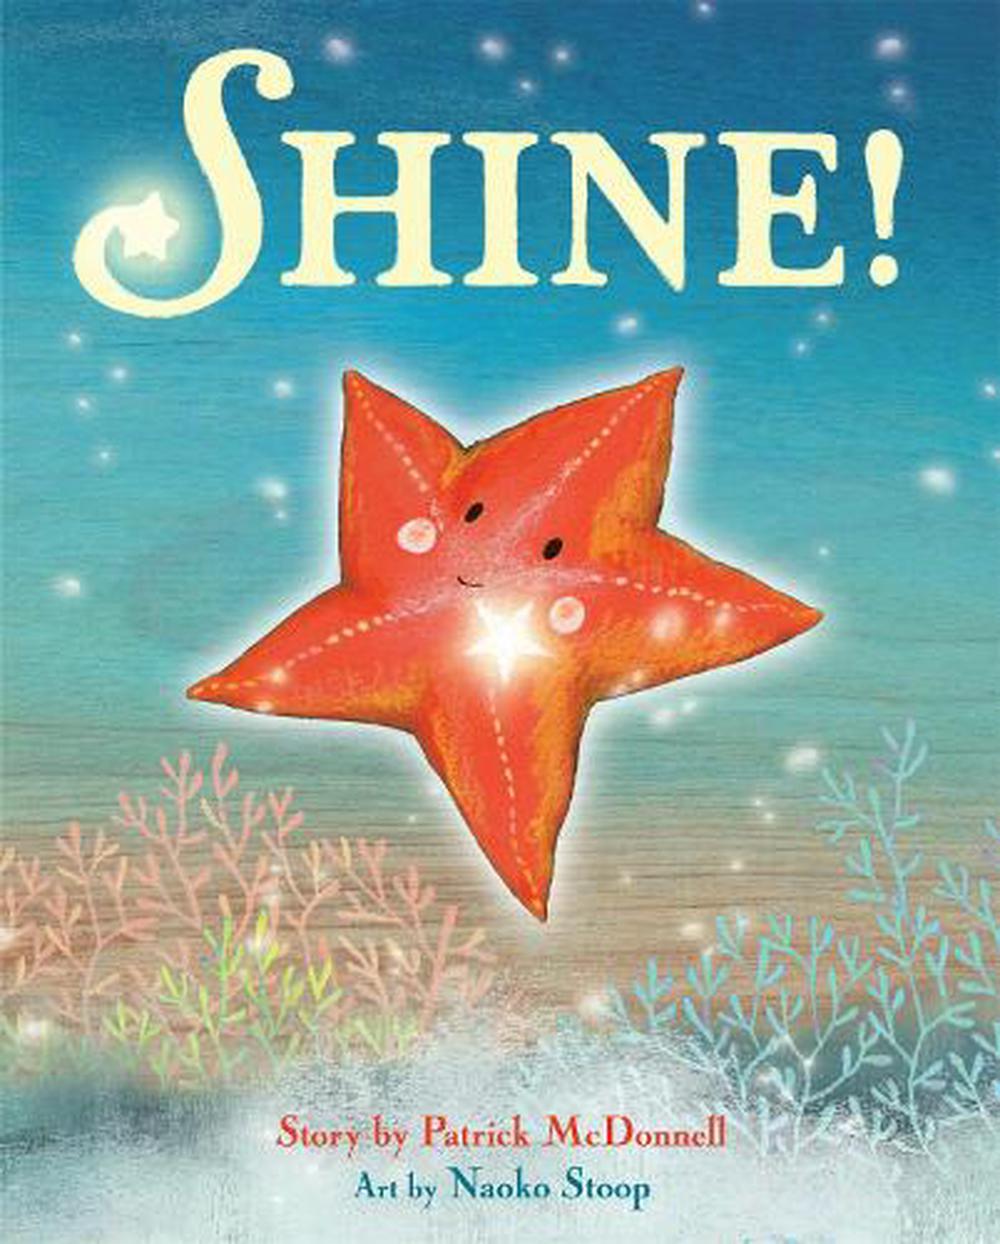 Shine! by Patrick Mcdonnell (English) Hardcover Book Free Shipping